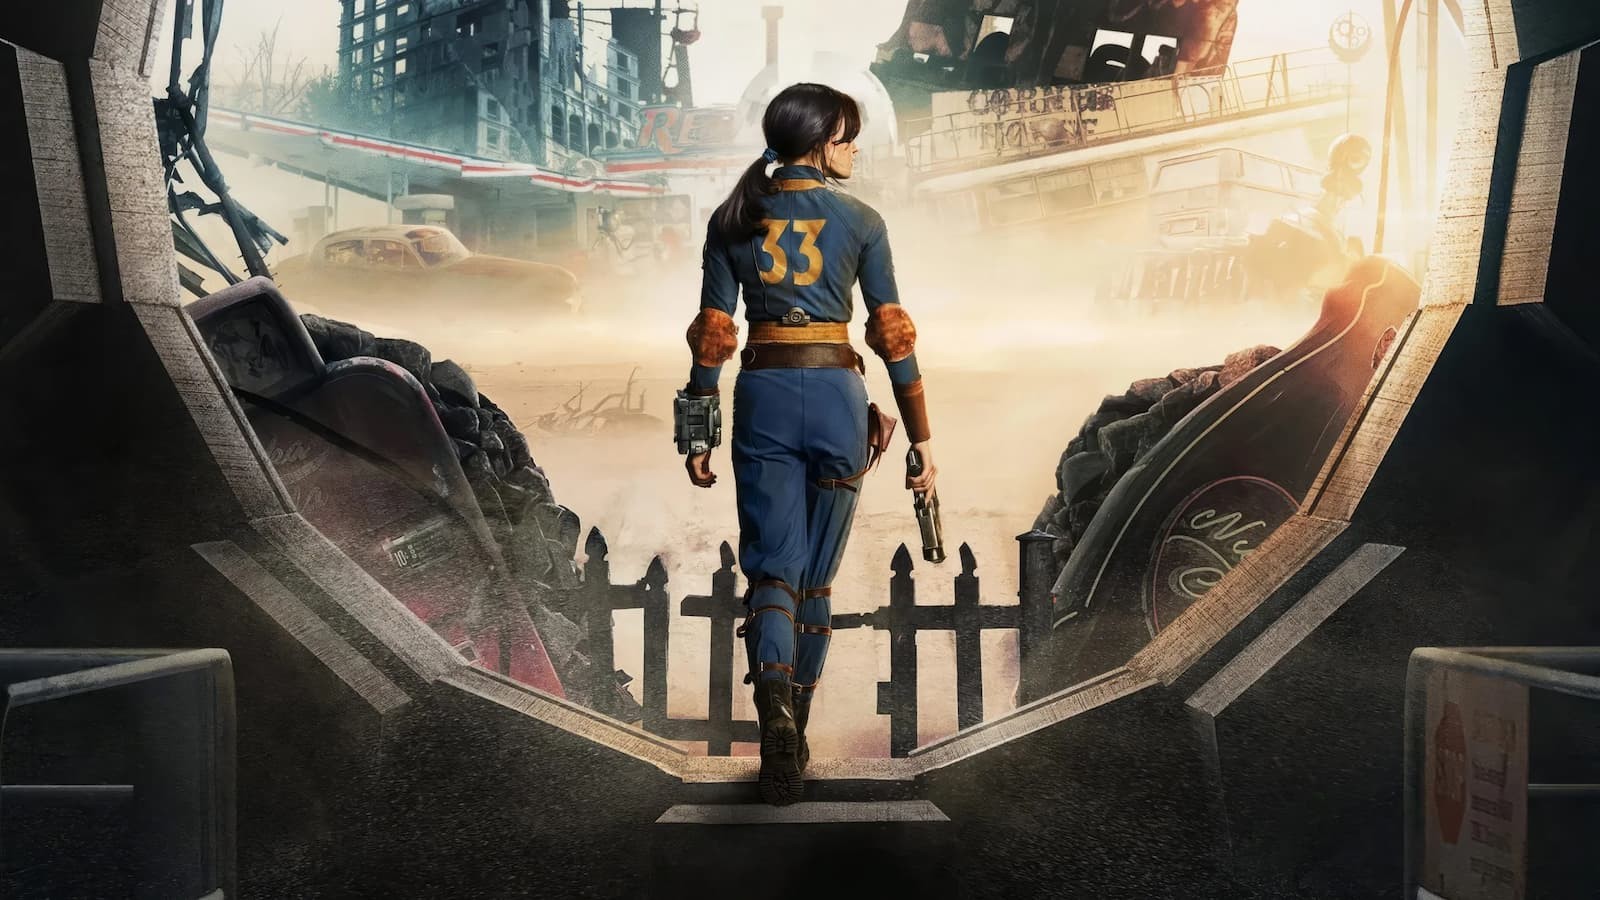 One of the covers for the Fallout TV Show